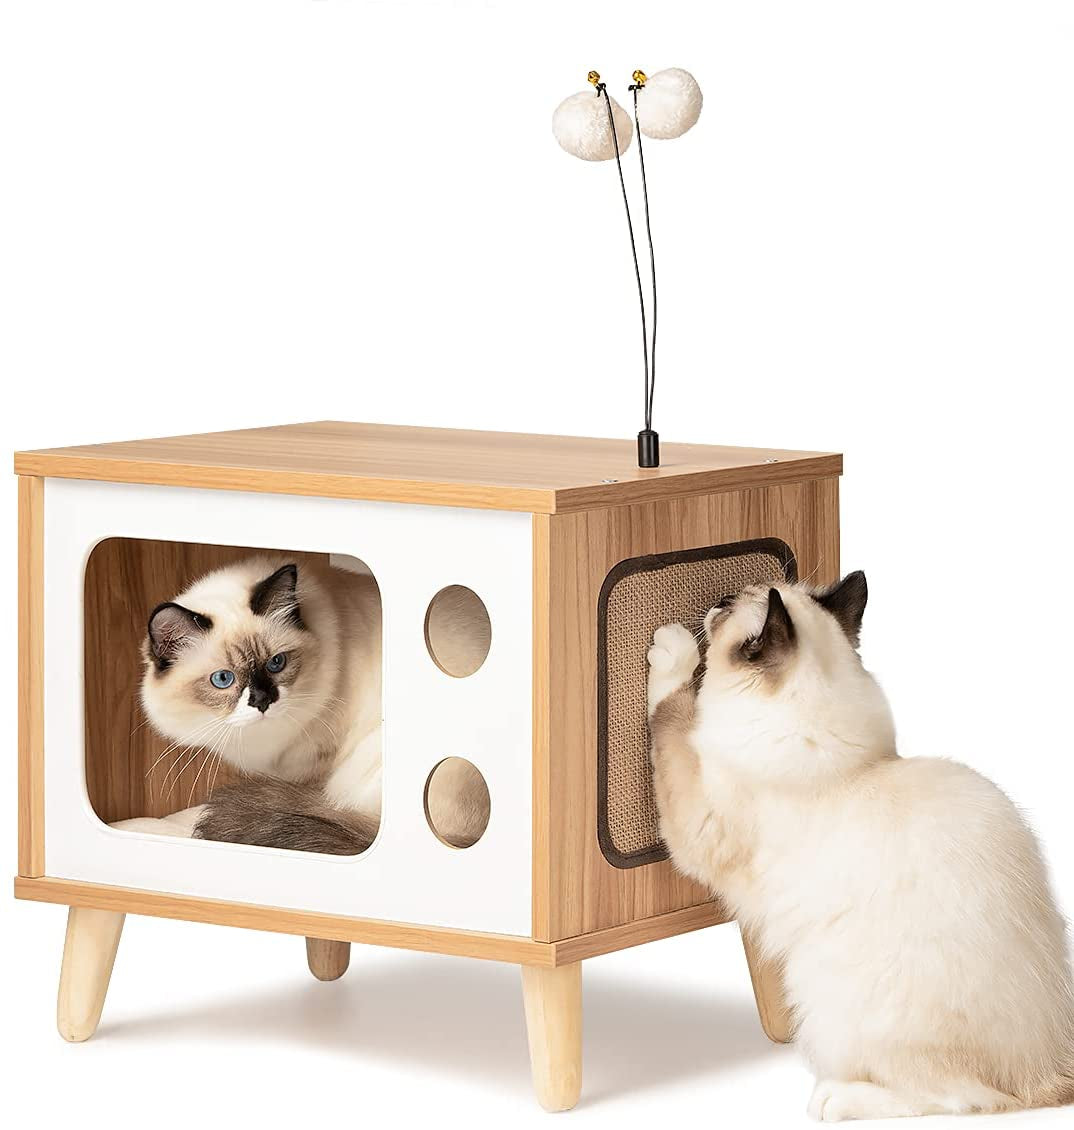 MZDXJ Cat House Wooden Cat Condo Cat Bed Indoor Tv-Shaped Sturdy Large Luxury Cat Shelter Furniture with Cushion Cat Scratcher Bell Ball Toys